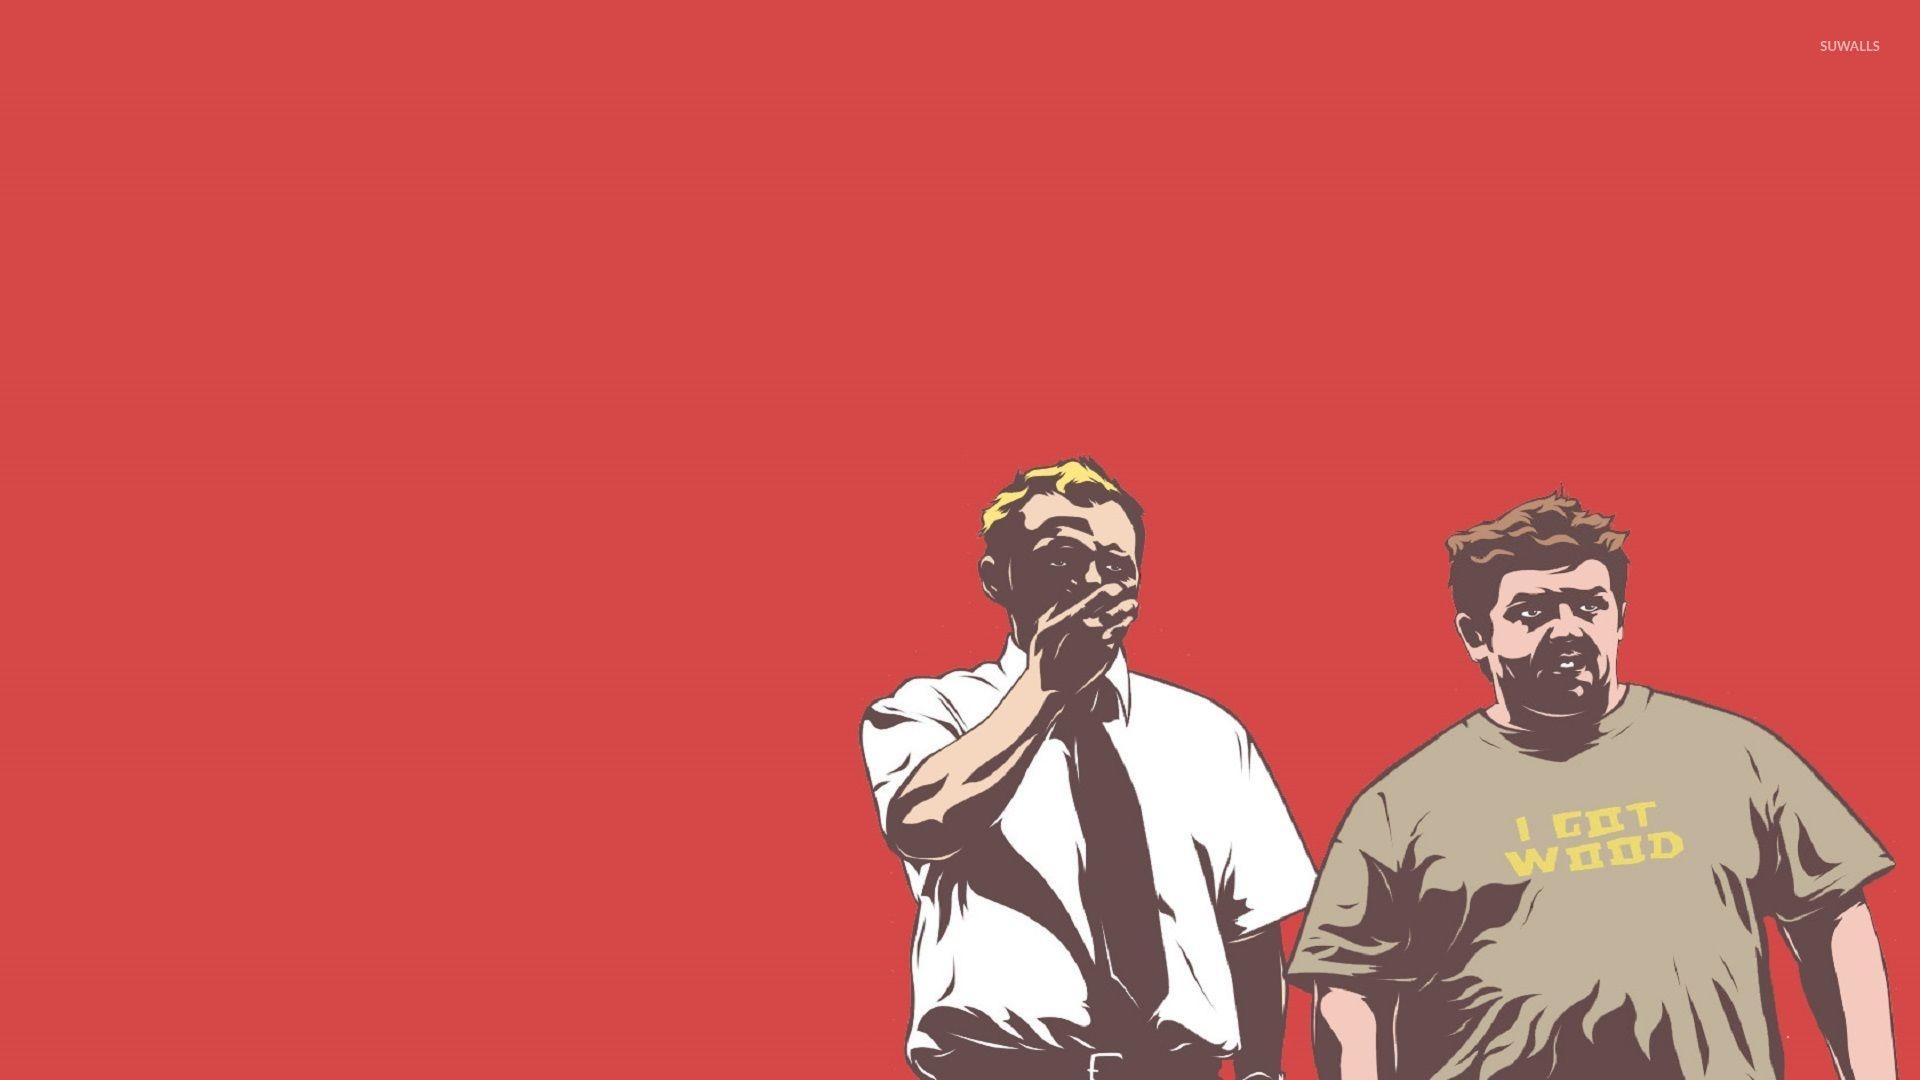 Shaun of the Dead Wallpaper Free Shaun of the Dead Background